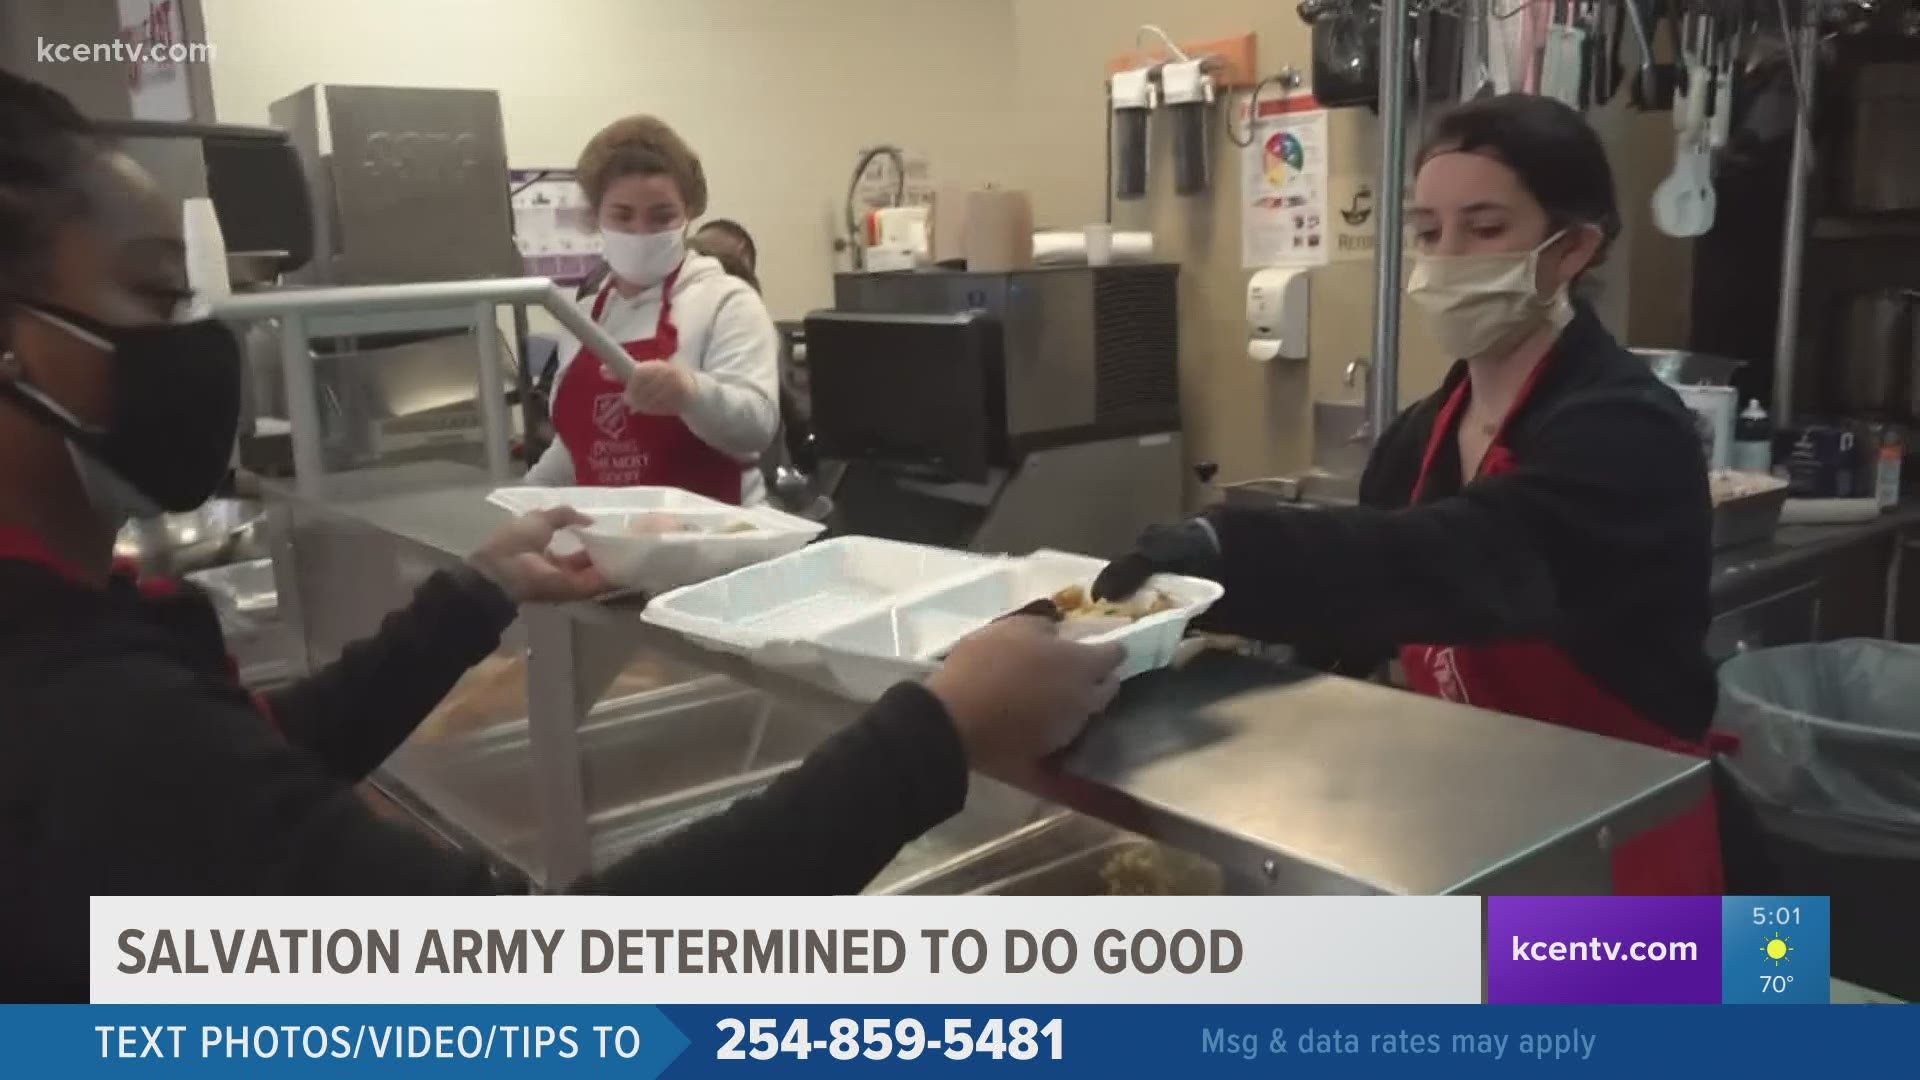 The Salvation Army was determined to host a Thanksgiving meal. Although they faced the uncertainty of the pandemic and economic challenges, up to 300 people were fed